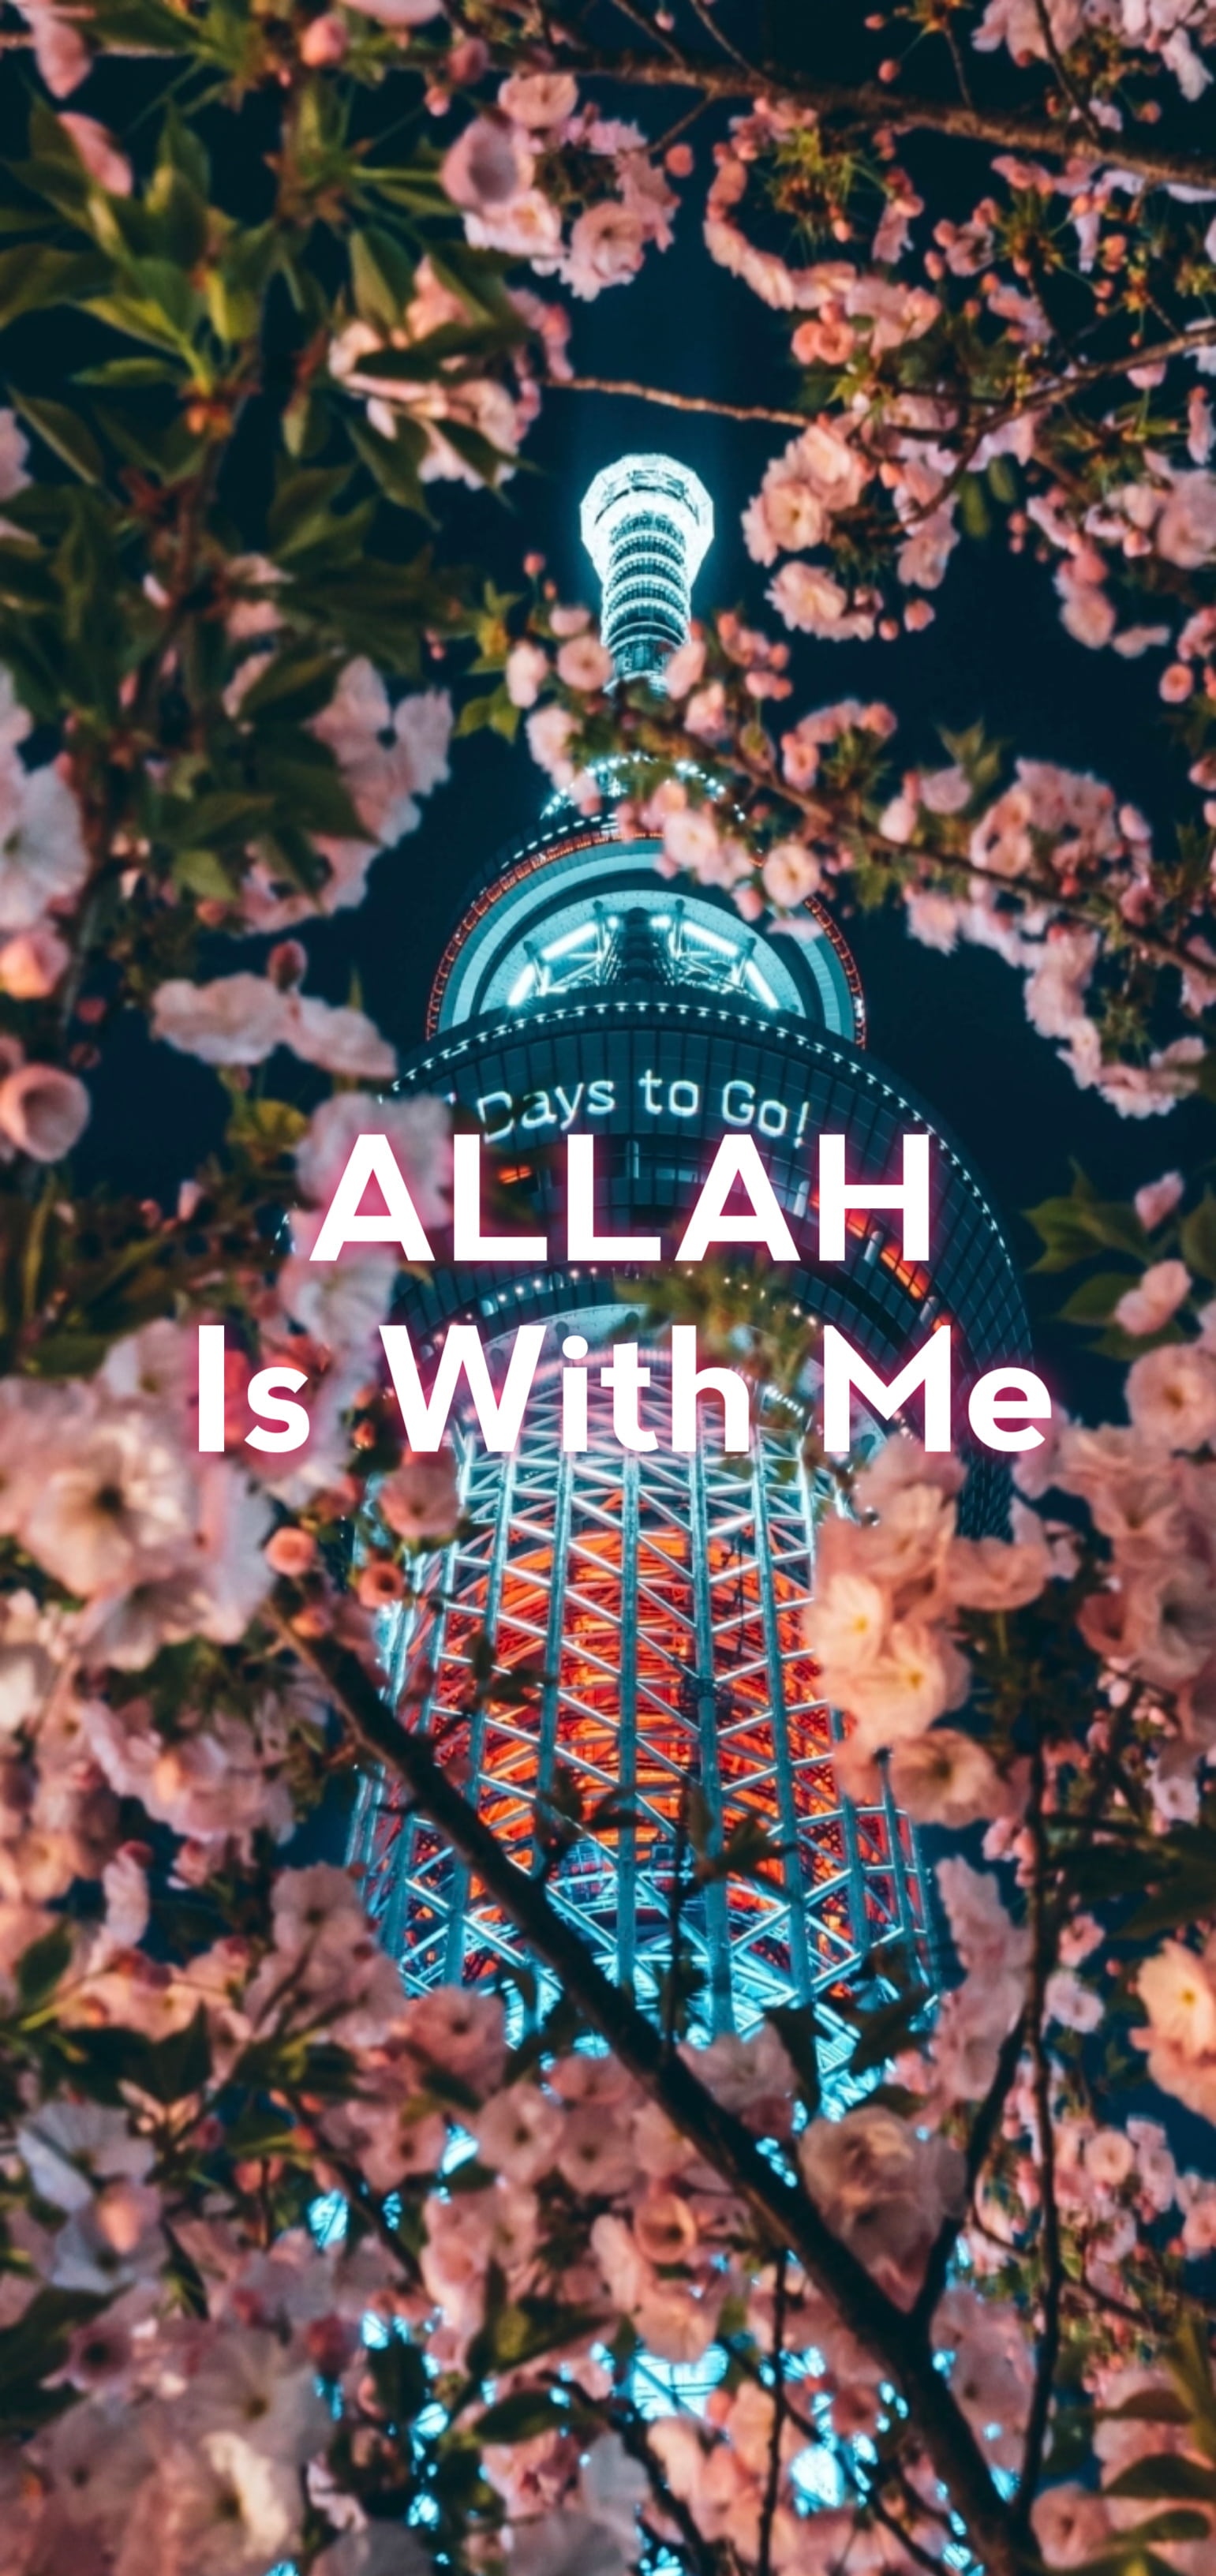 New Islamic - Allah Is With Me